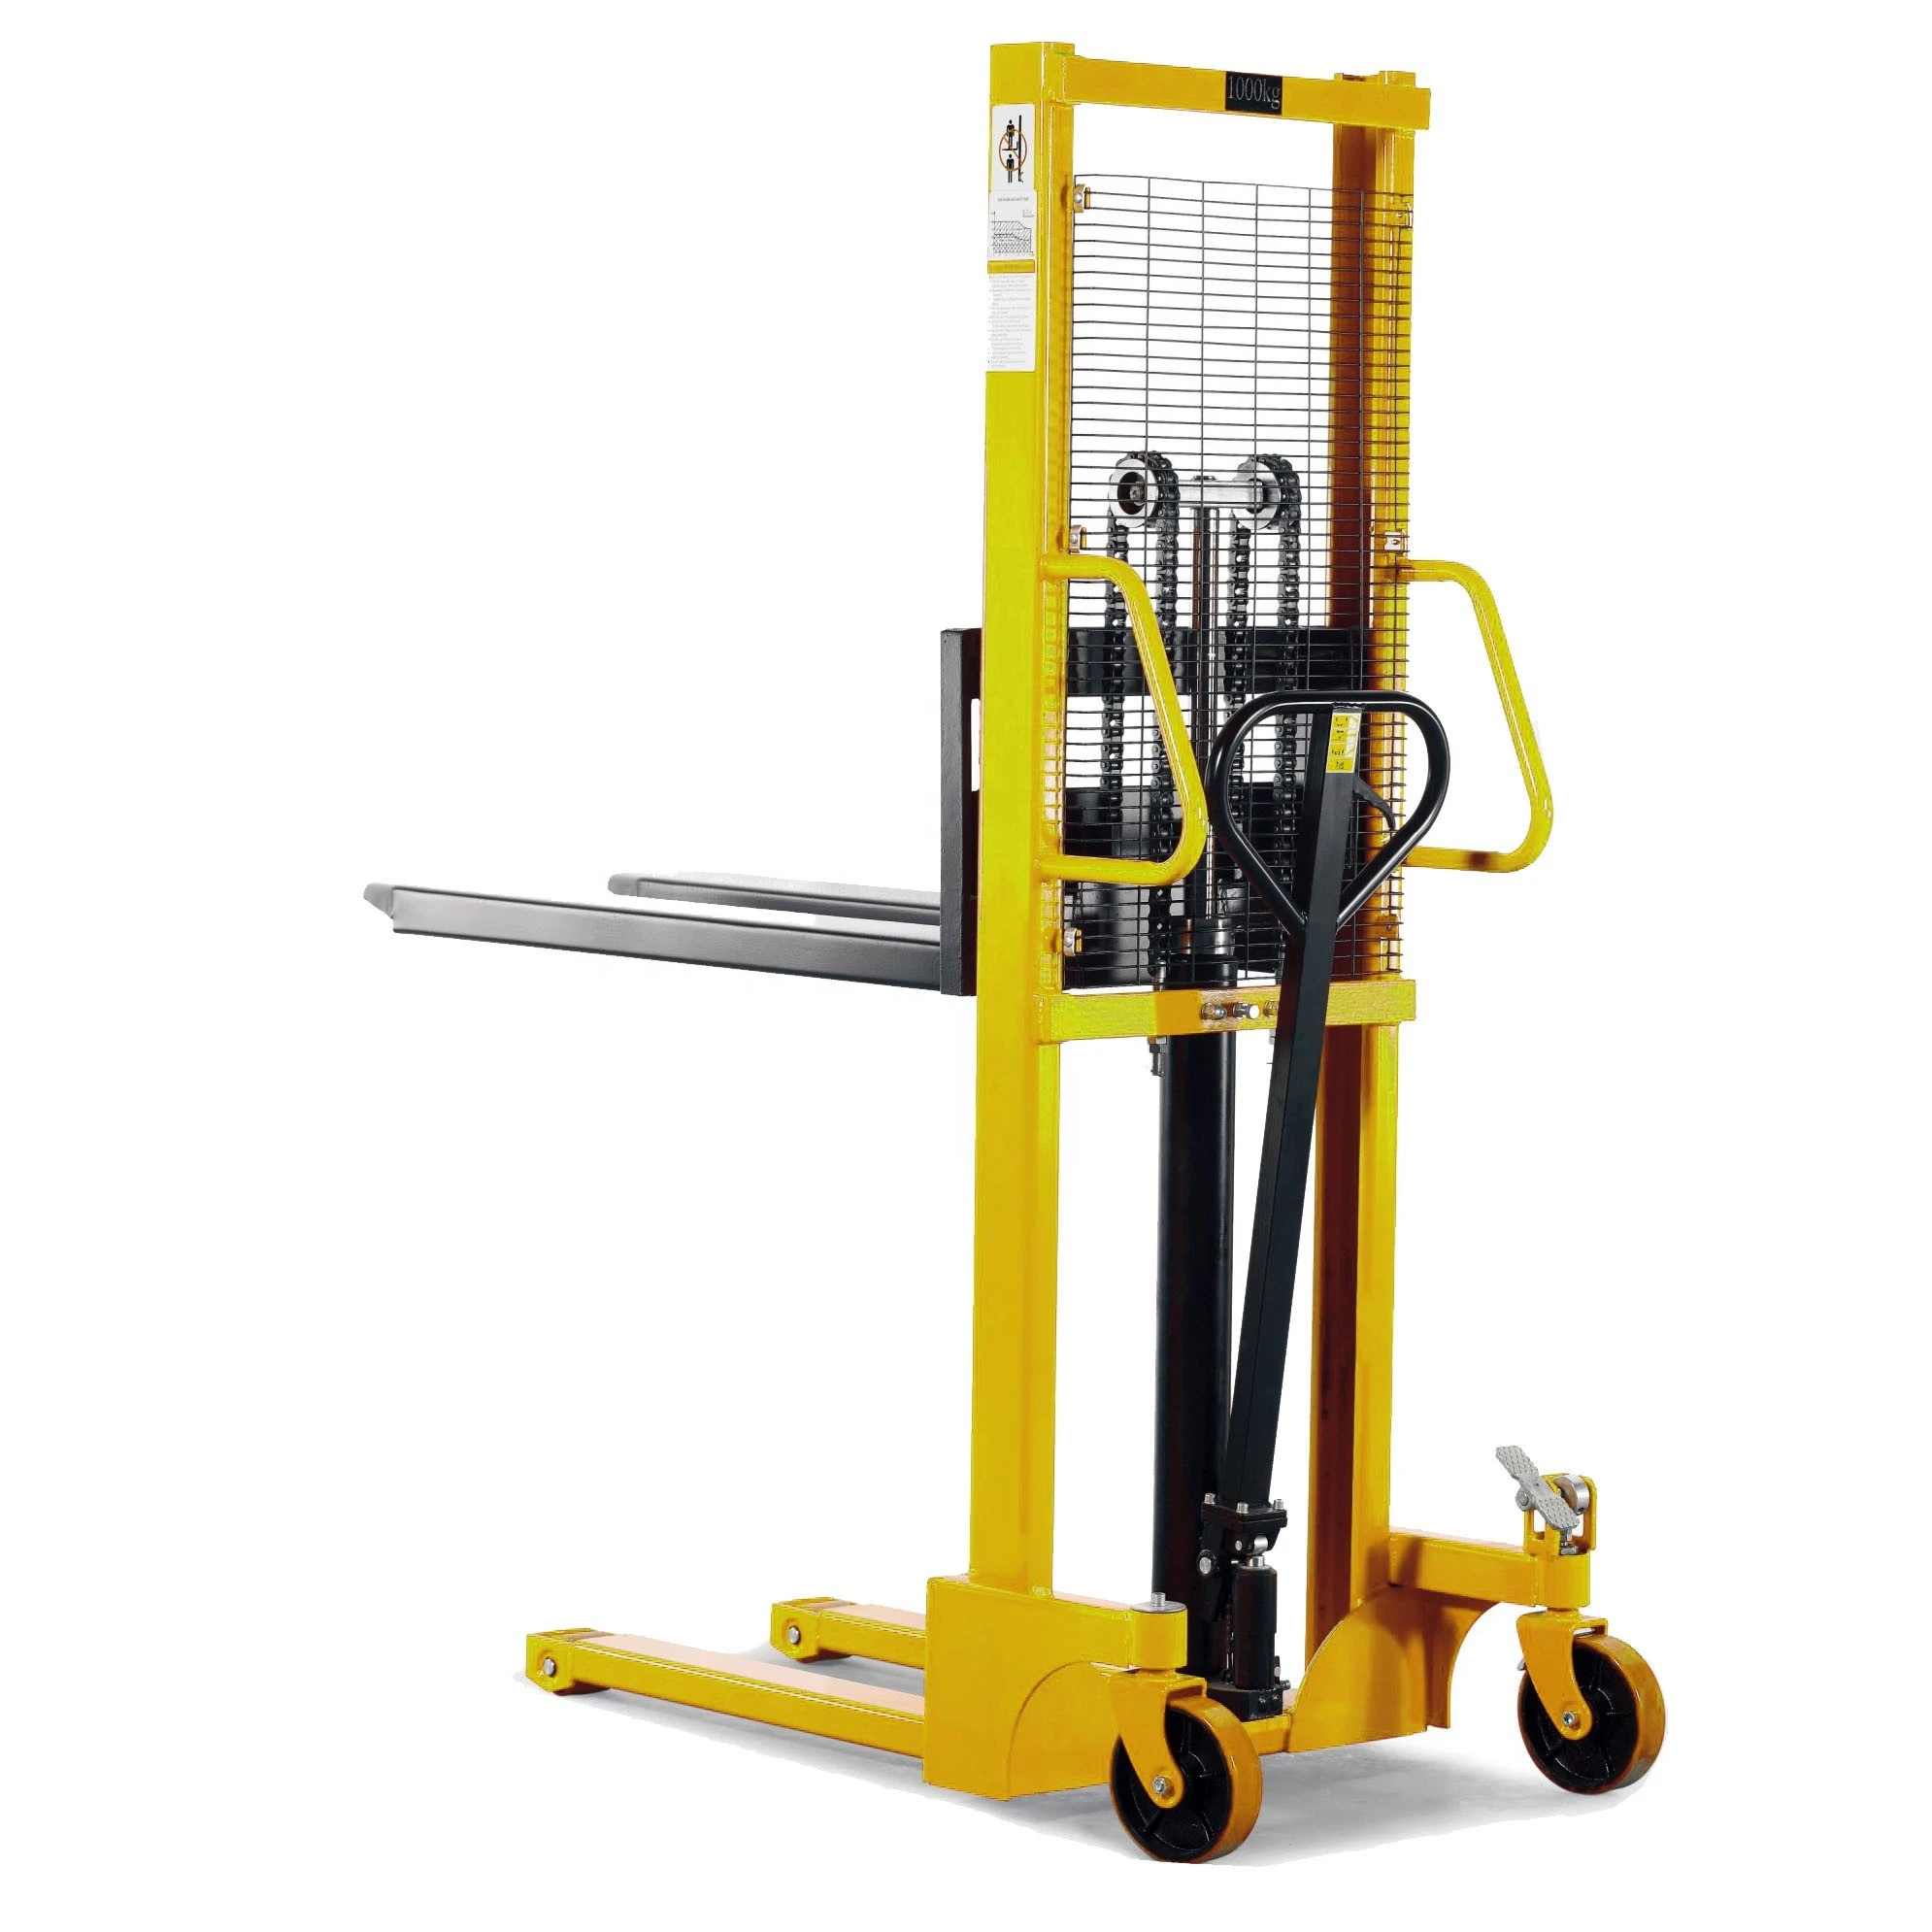 Hot product hydraulic electric stacker/manual forklift/material handling equipment